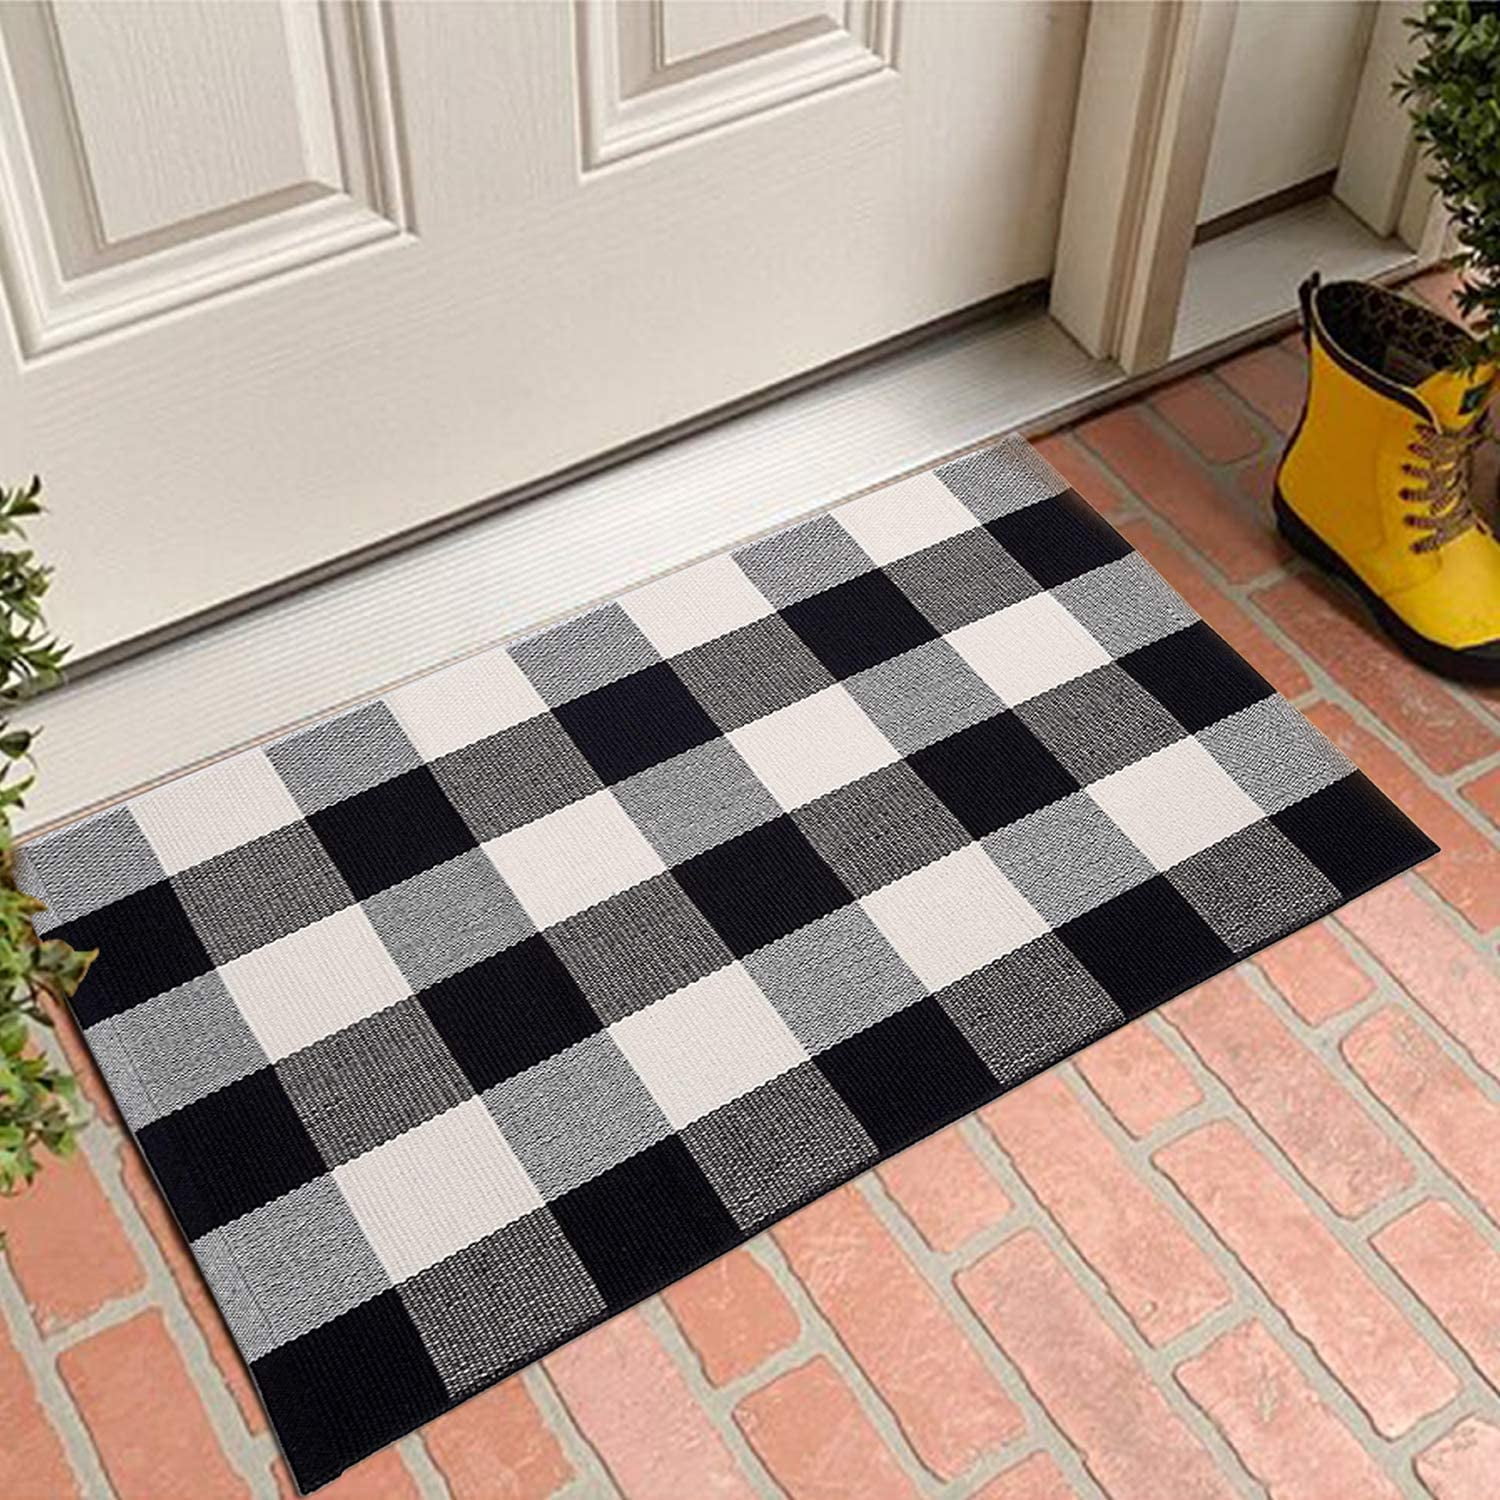 PK.ZTopia Buffalo Plaid Rug 23.6 x 35.4 Inches, Buffalo Check Rug, Black  and White Checked Rug Hand-Woven Indoor Washable Entryway Front Porch Decor 